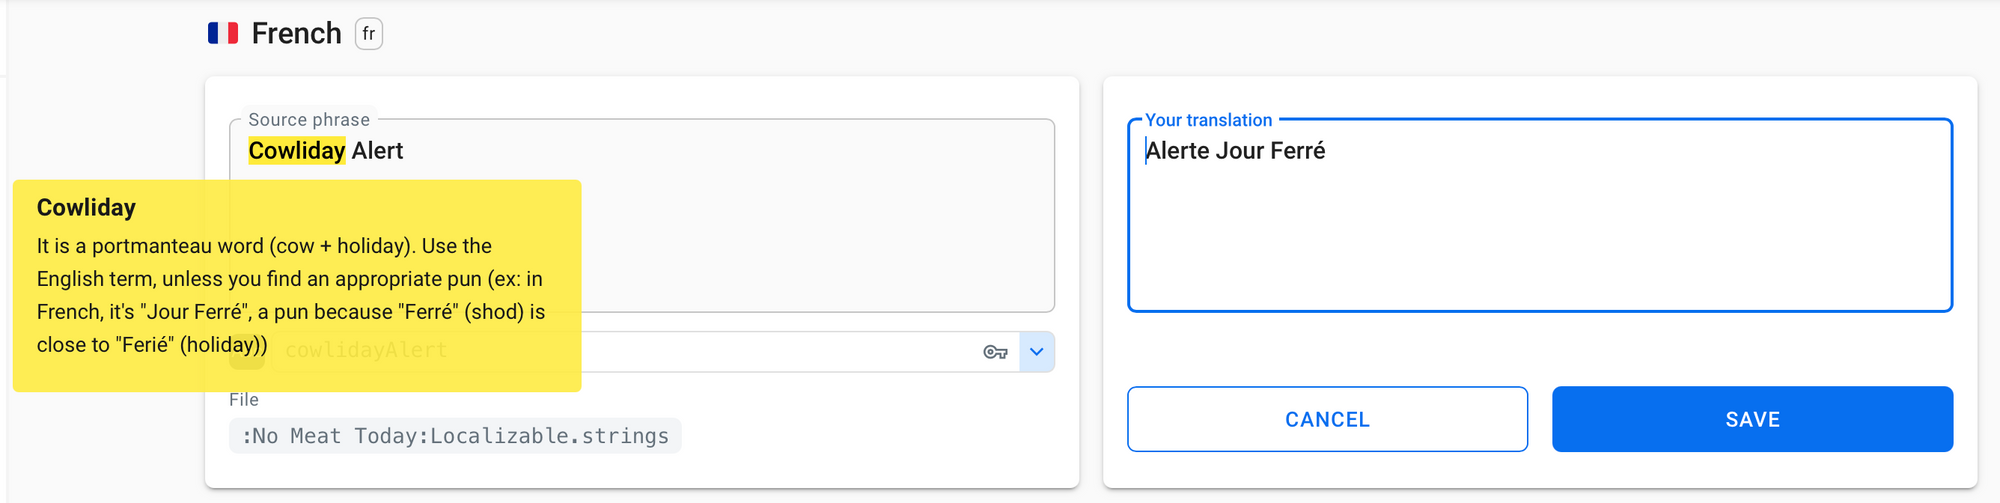 Translating your iOS app with Localazy